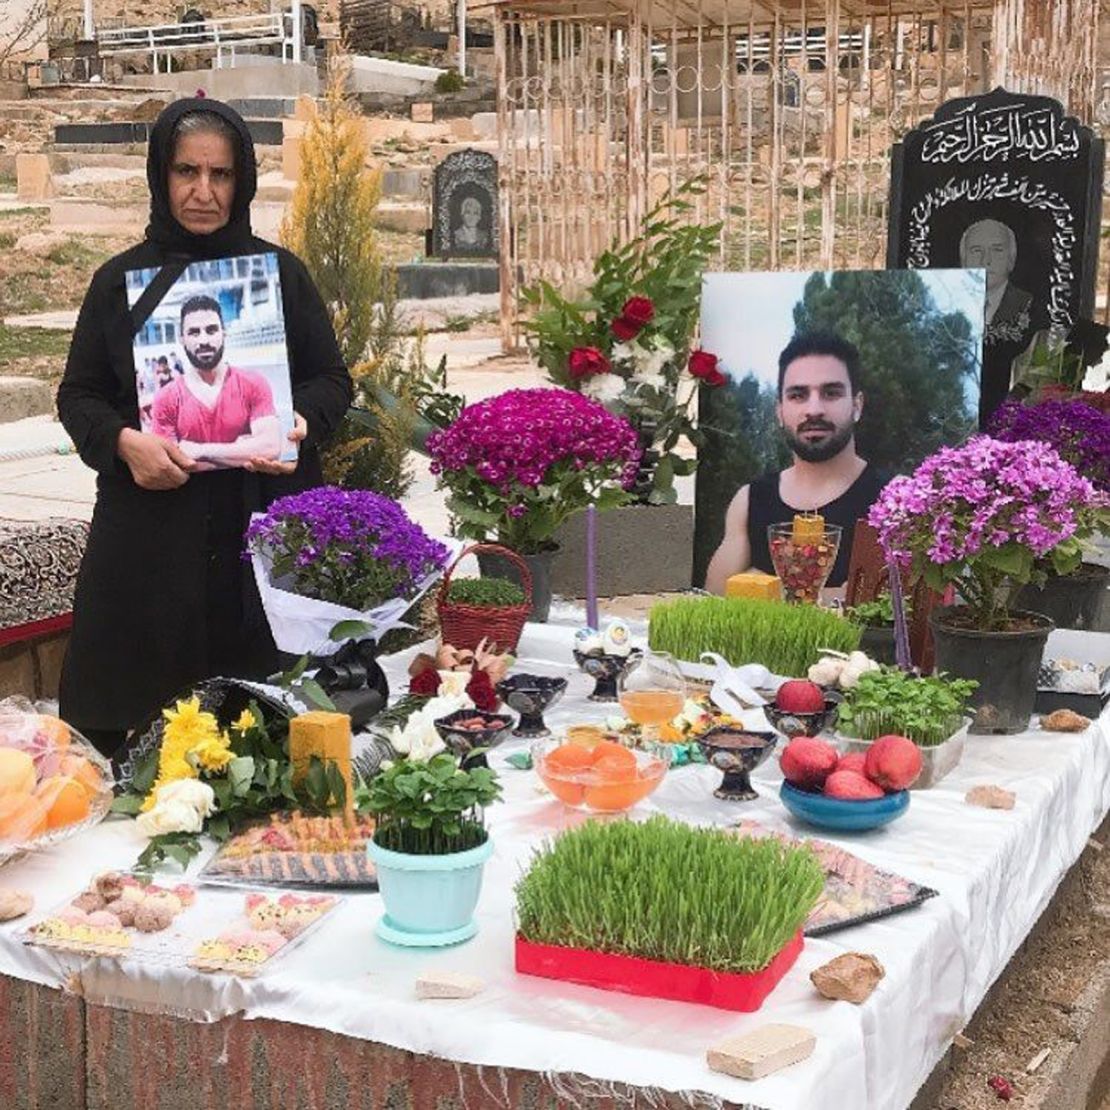 Navid's mother (left) stands by Navid's grave in March 2021 in Shiraz, Iran.